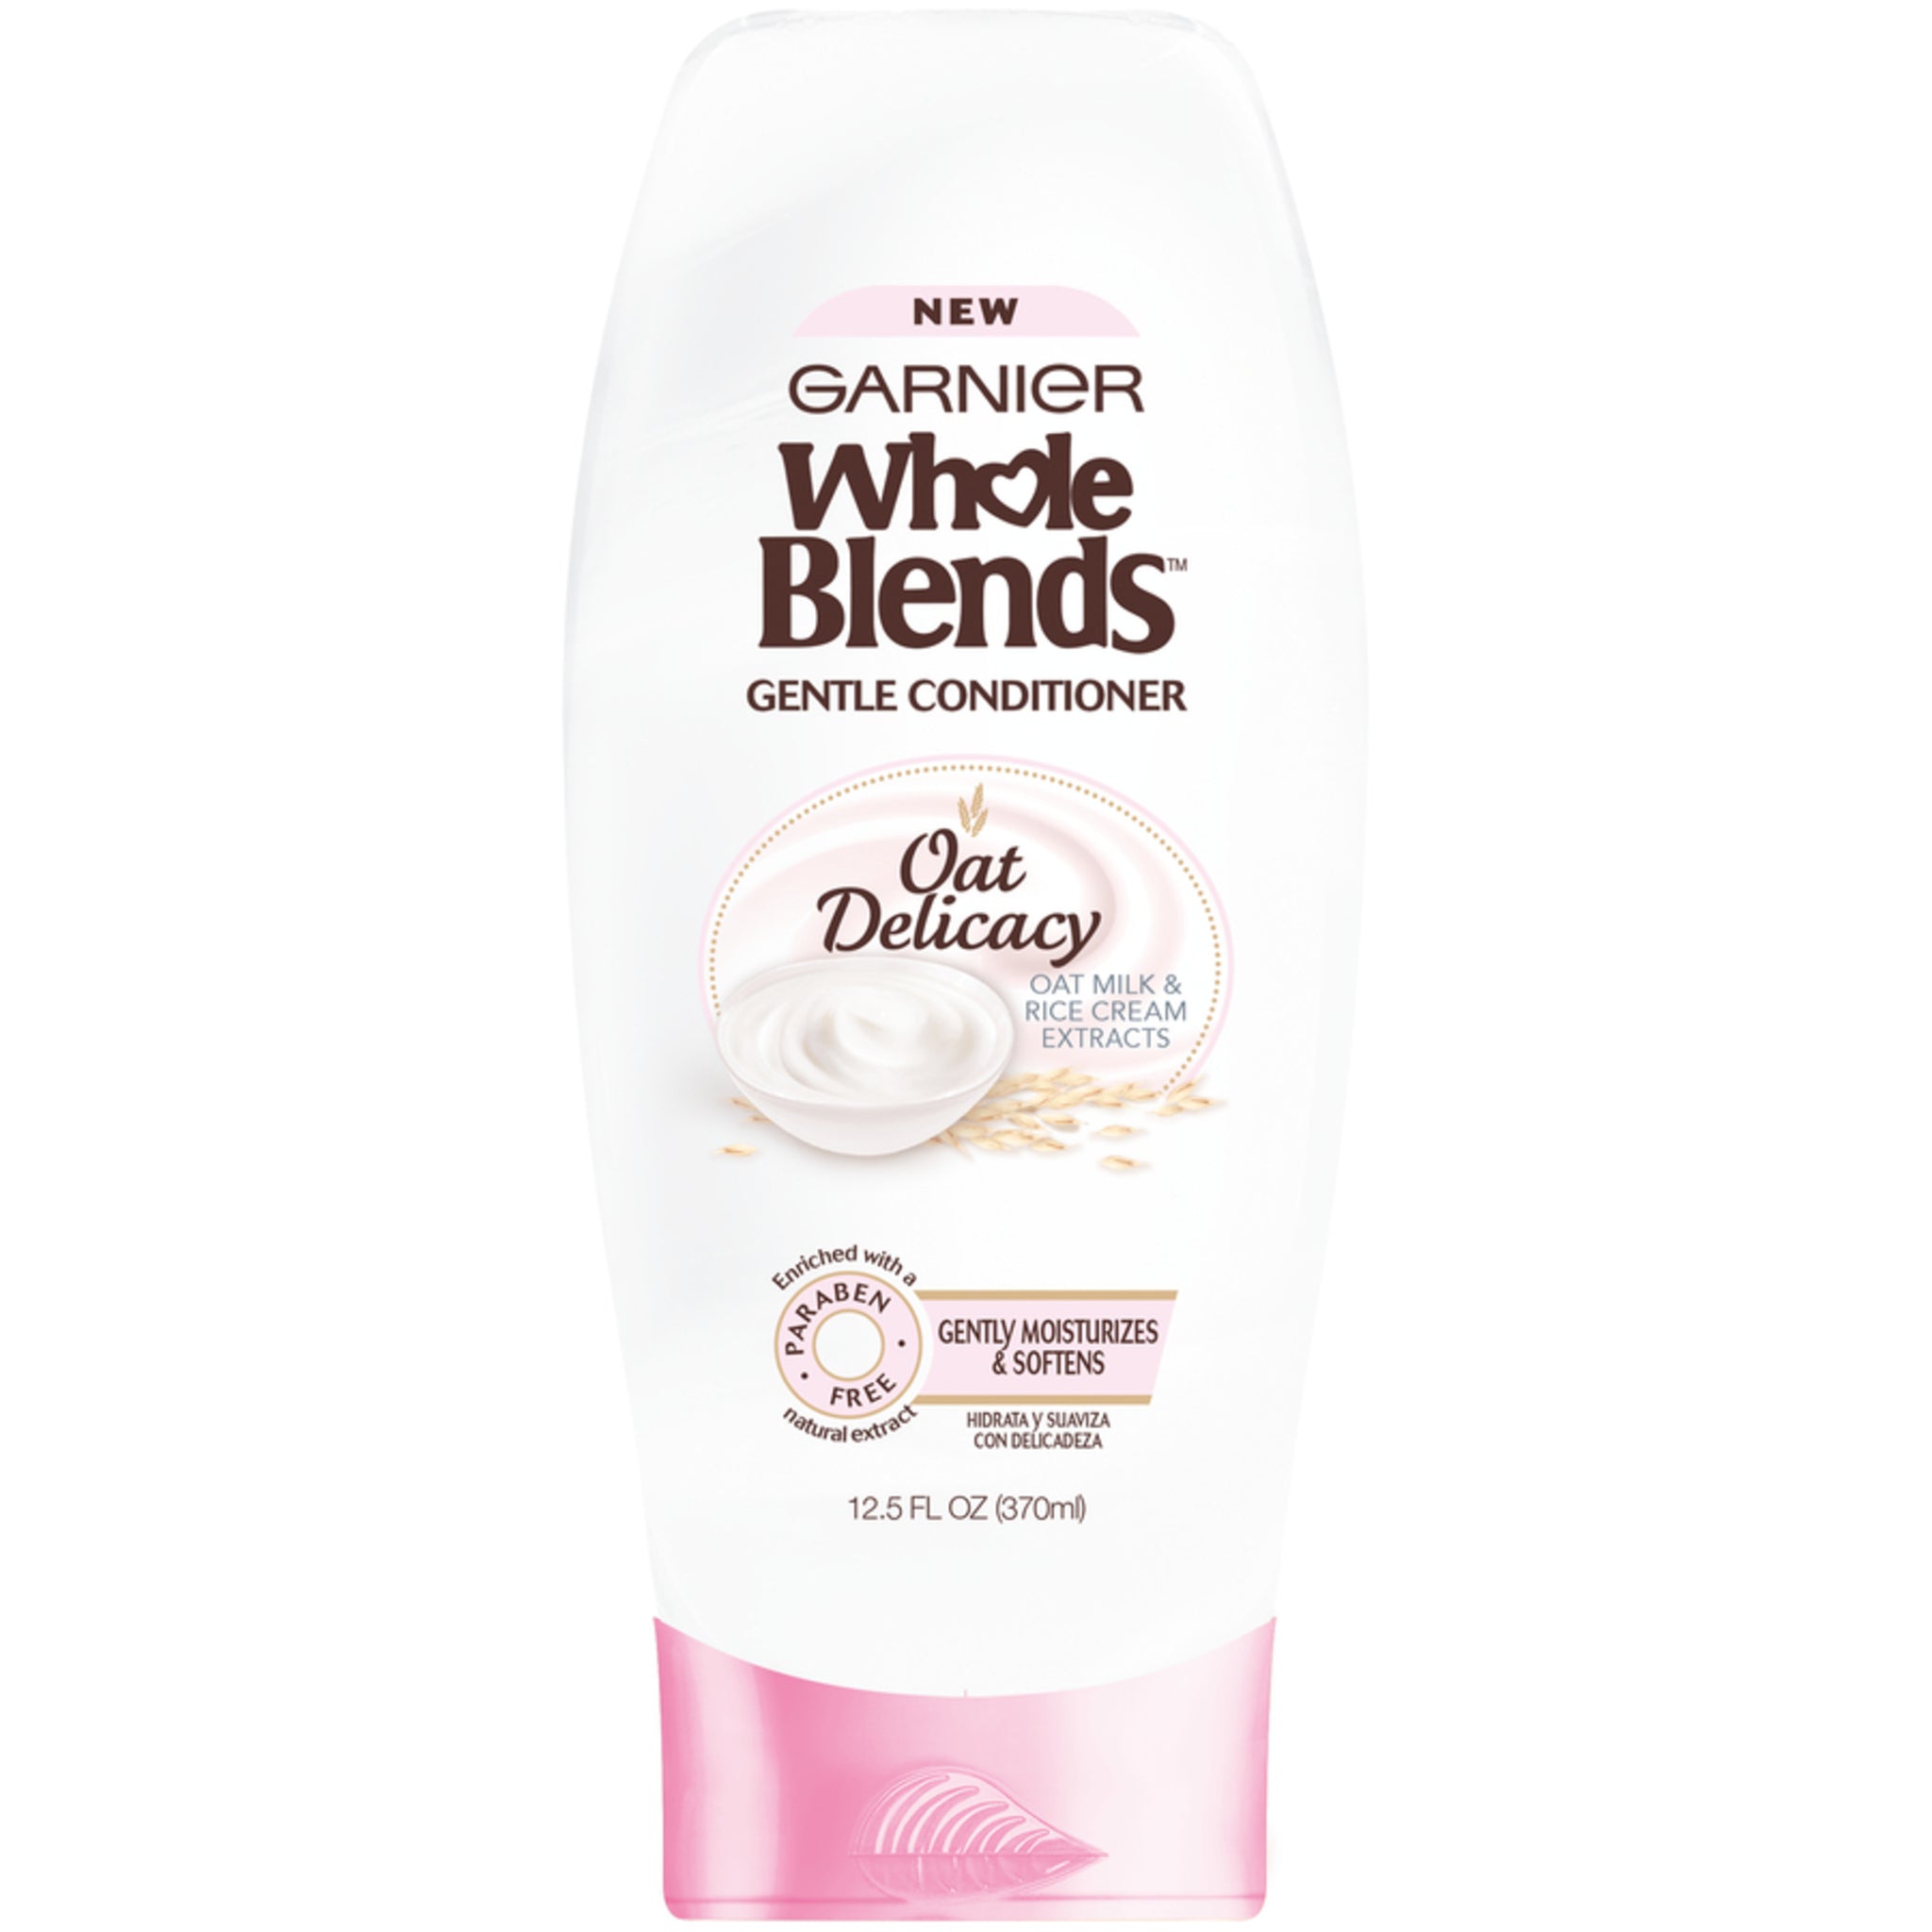 Whole Blends Oat Delicacy Conditioner